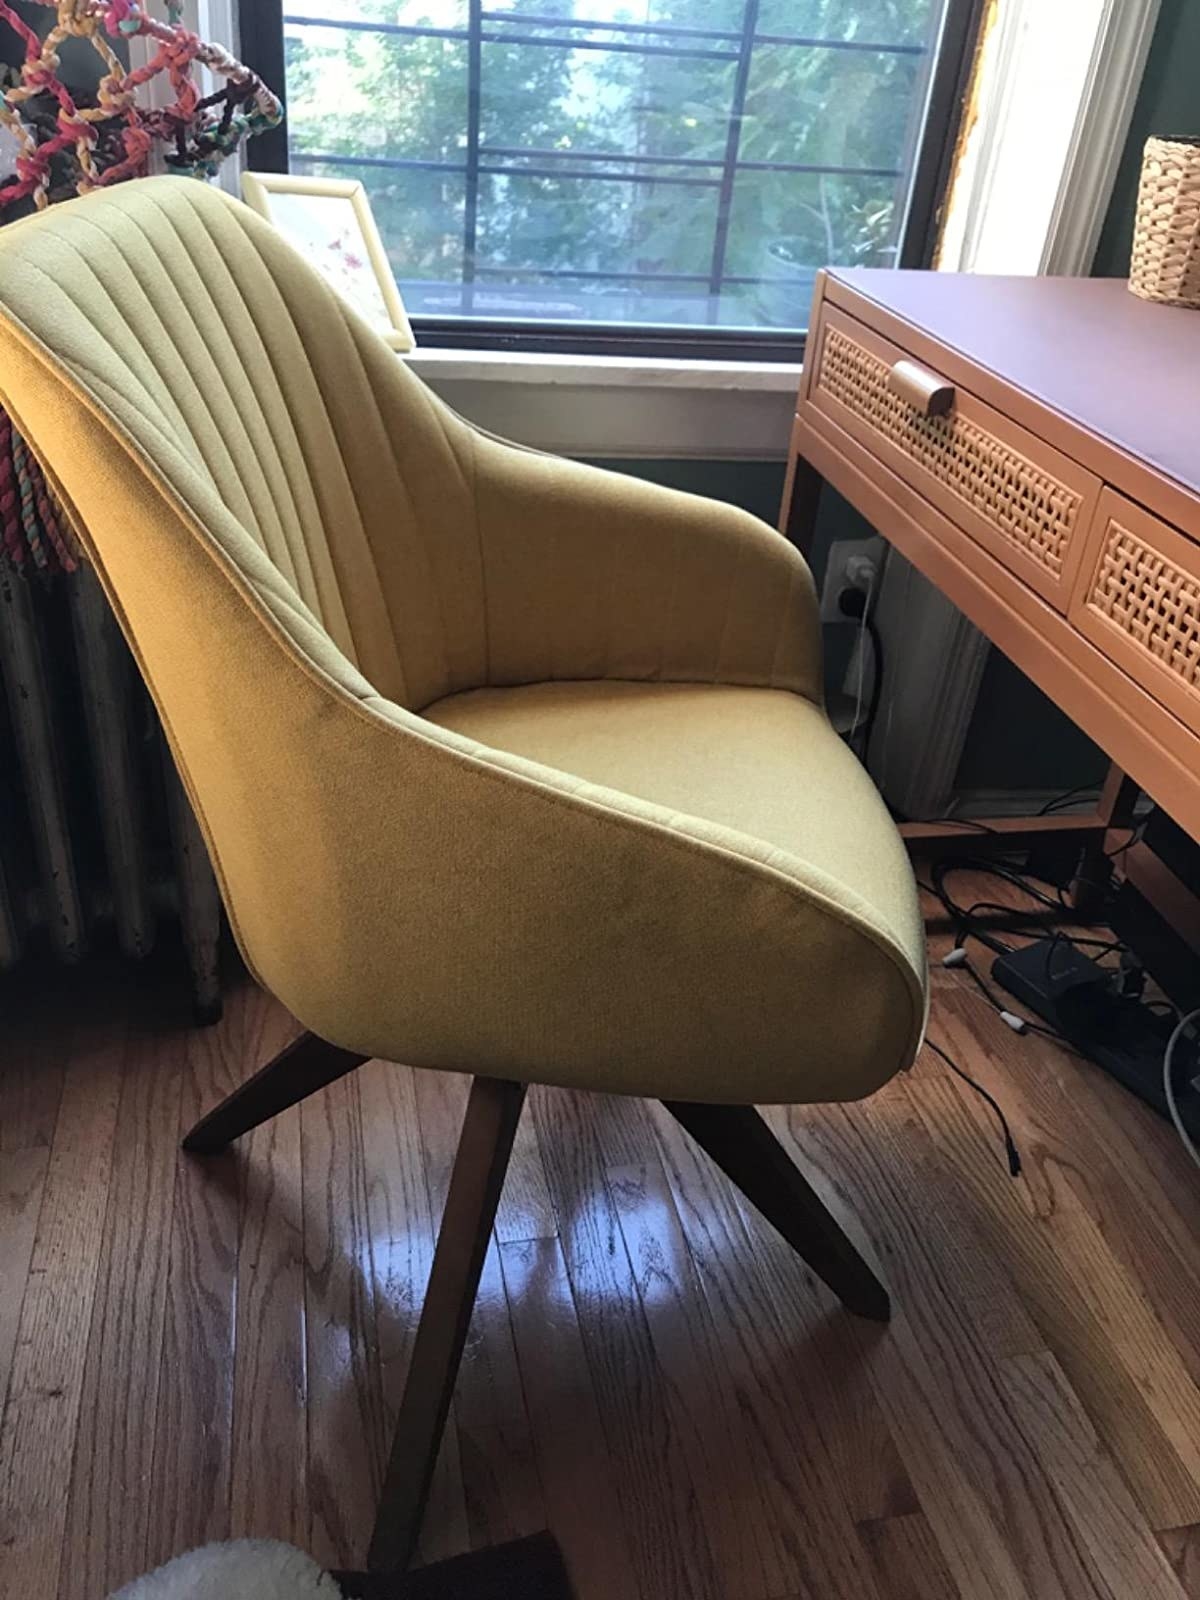 The chair in yellow